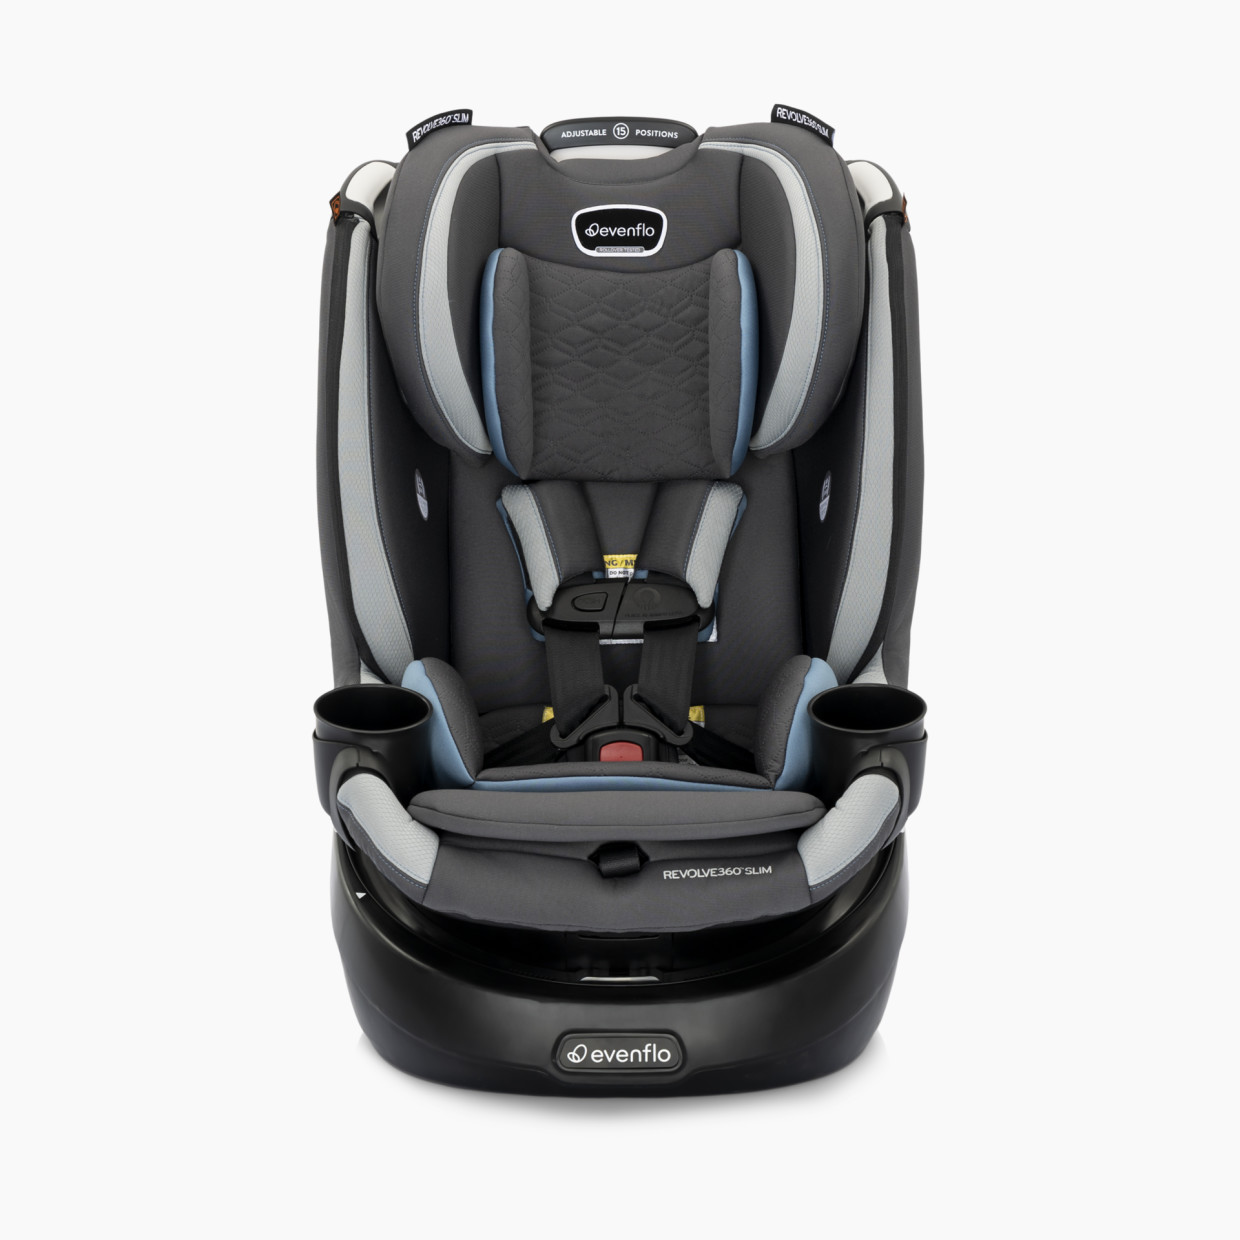 Are Rotating Car Seats Safe?, safety seats